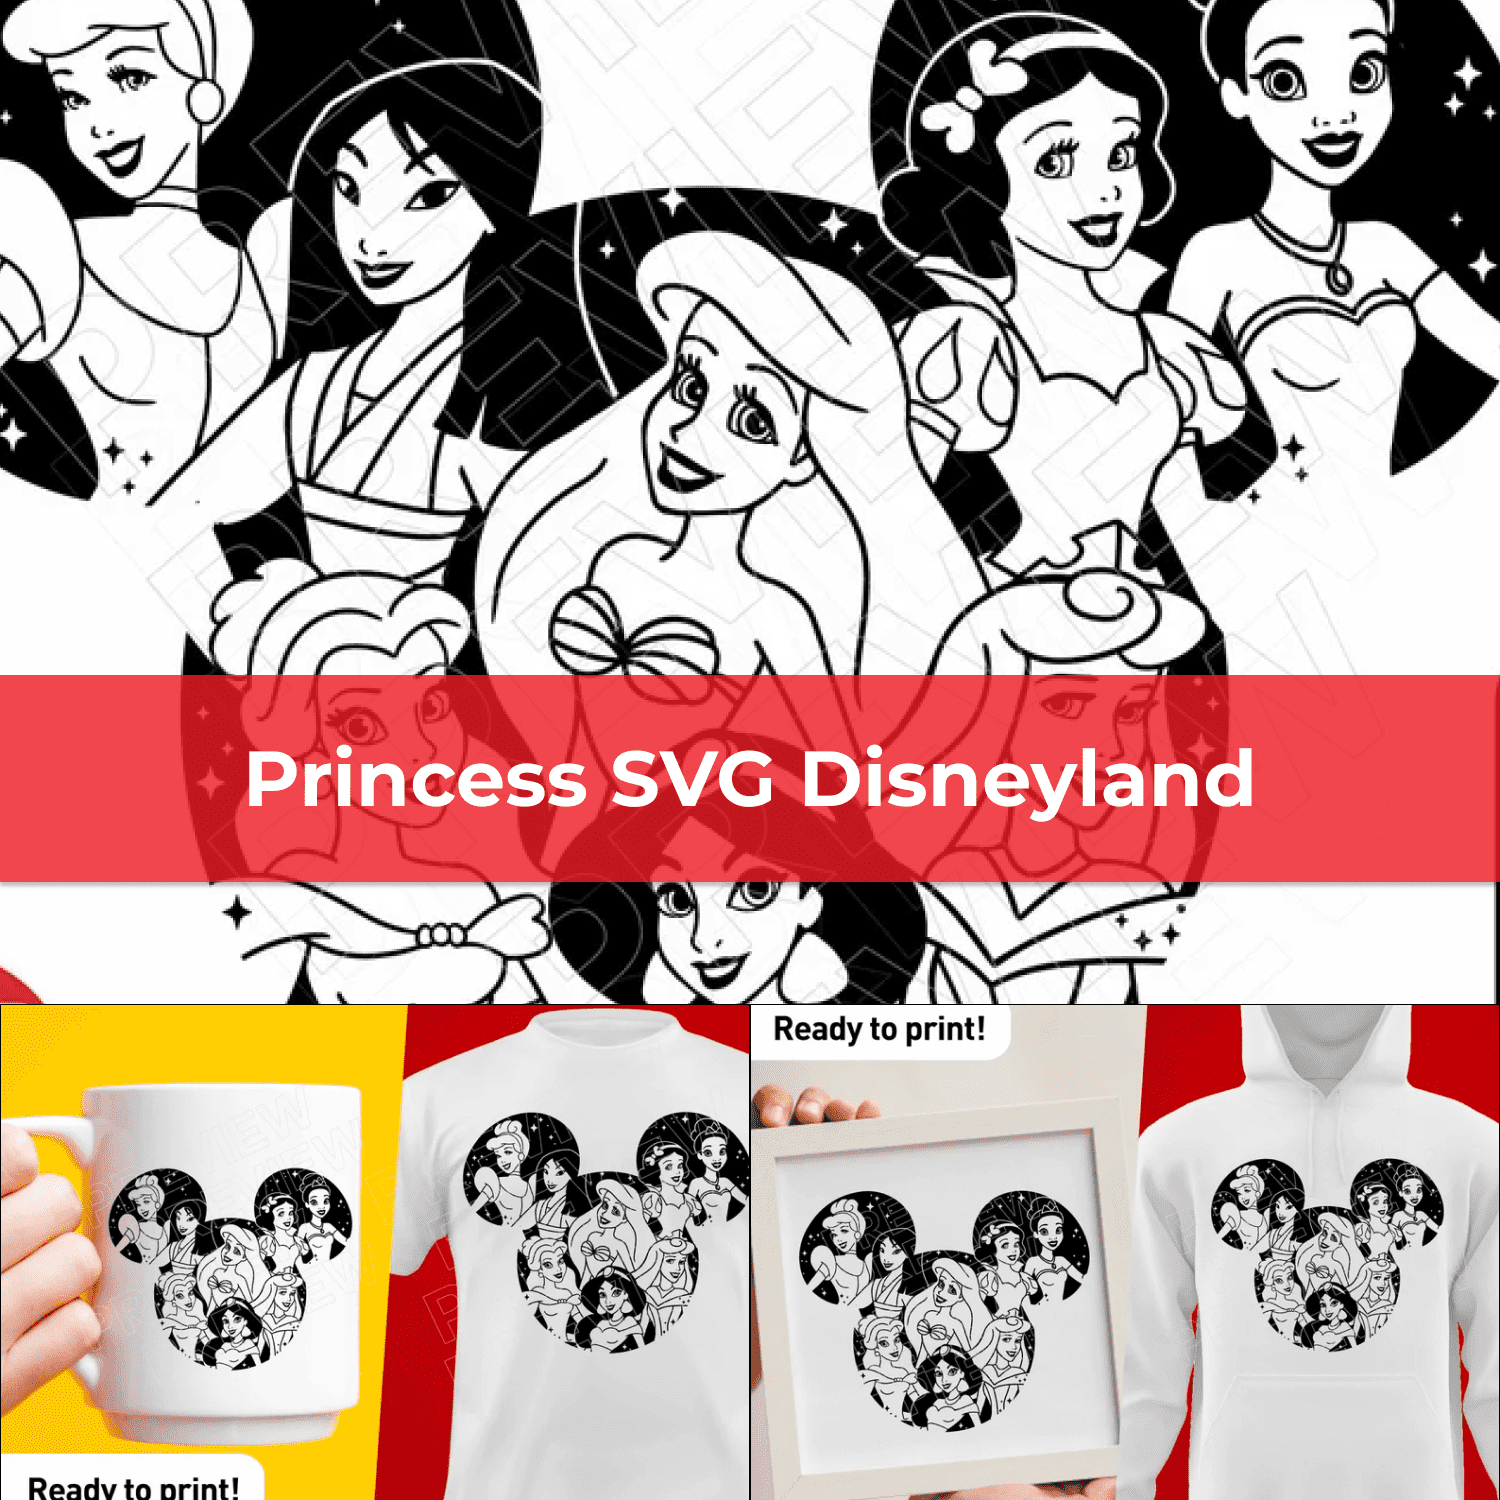 Princess SVG Disneyland ears png clipart cover.